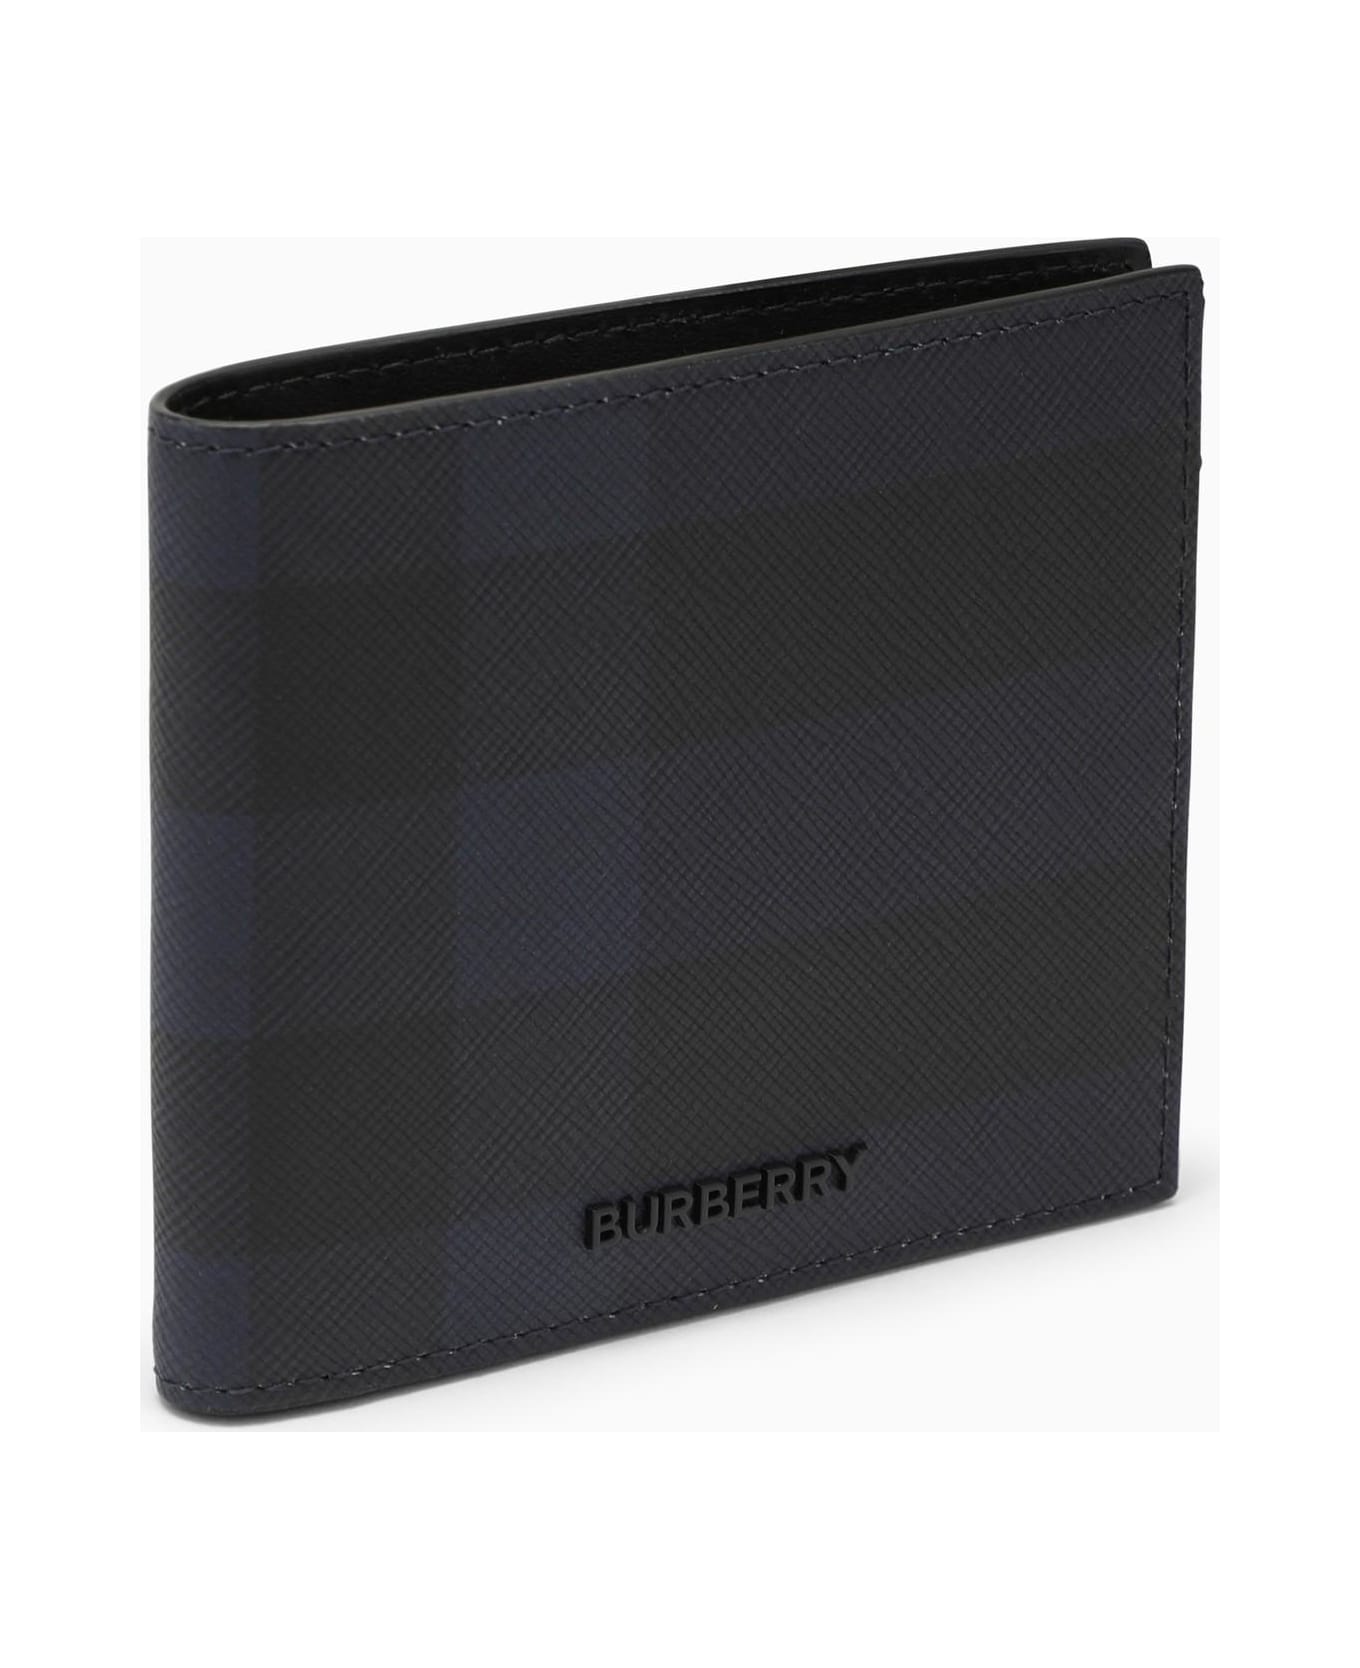 Burberry Check Pattern Navy Blue Wallet - NAVY